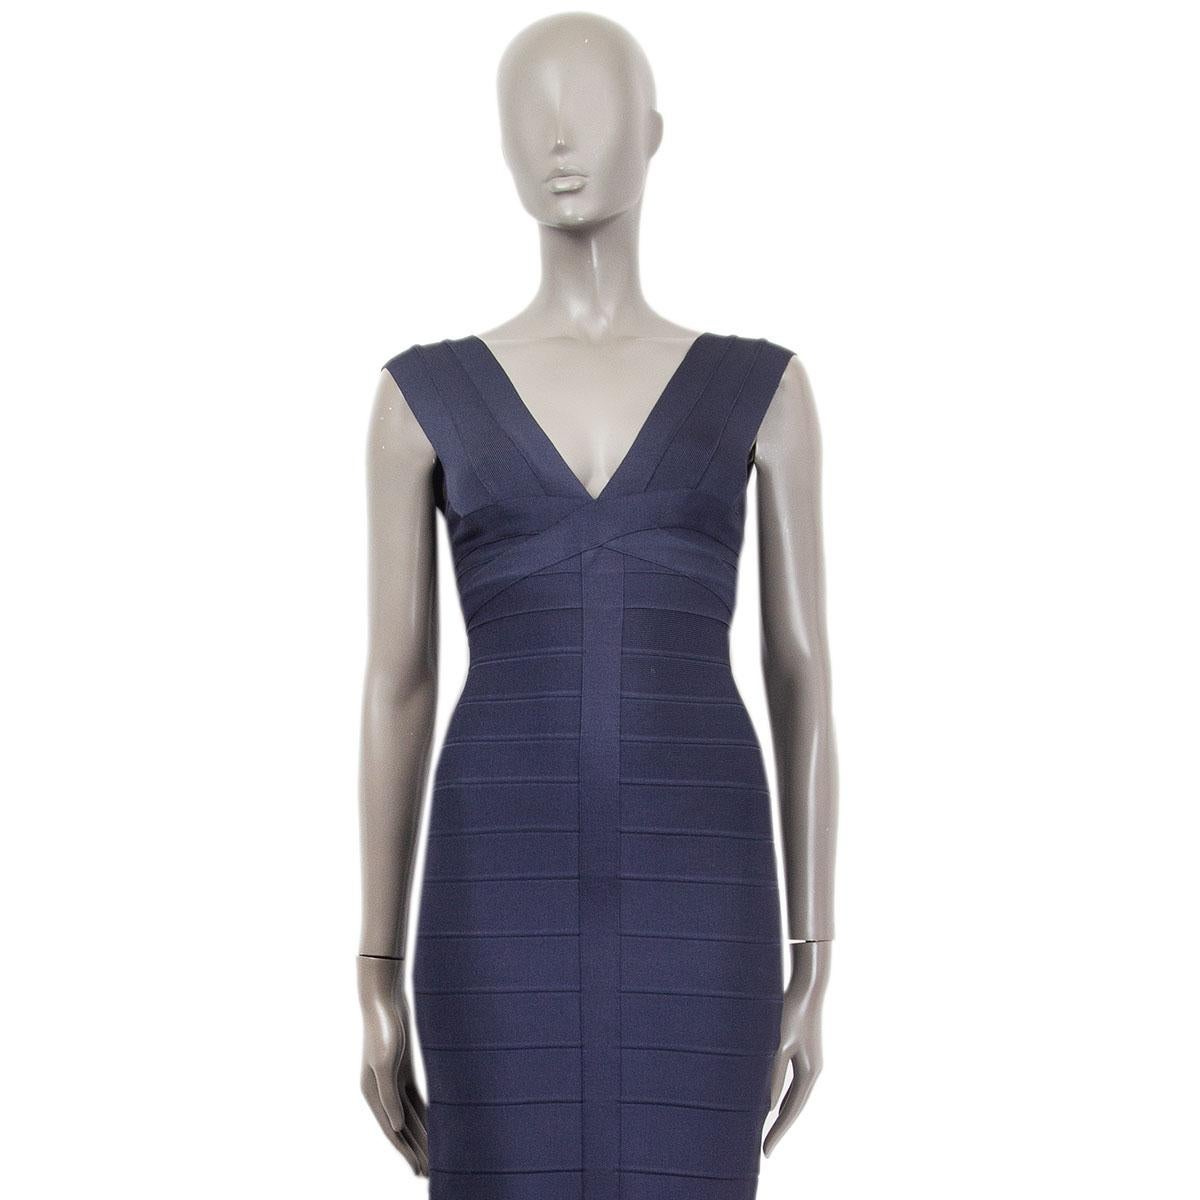 100% authentic Herve Leger sleeveless bandage cocktail dress in midnight-blue rayon (90%), nylon (9%) and elastane (1%) with a deep V-neck. Closes with one hook and a concealed zipper on the back. Unlined. Has been worn and is in excellent